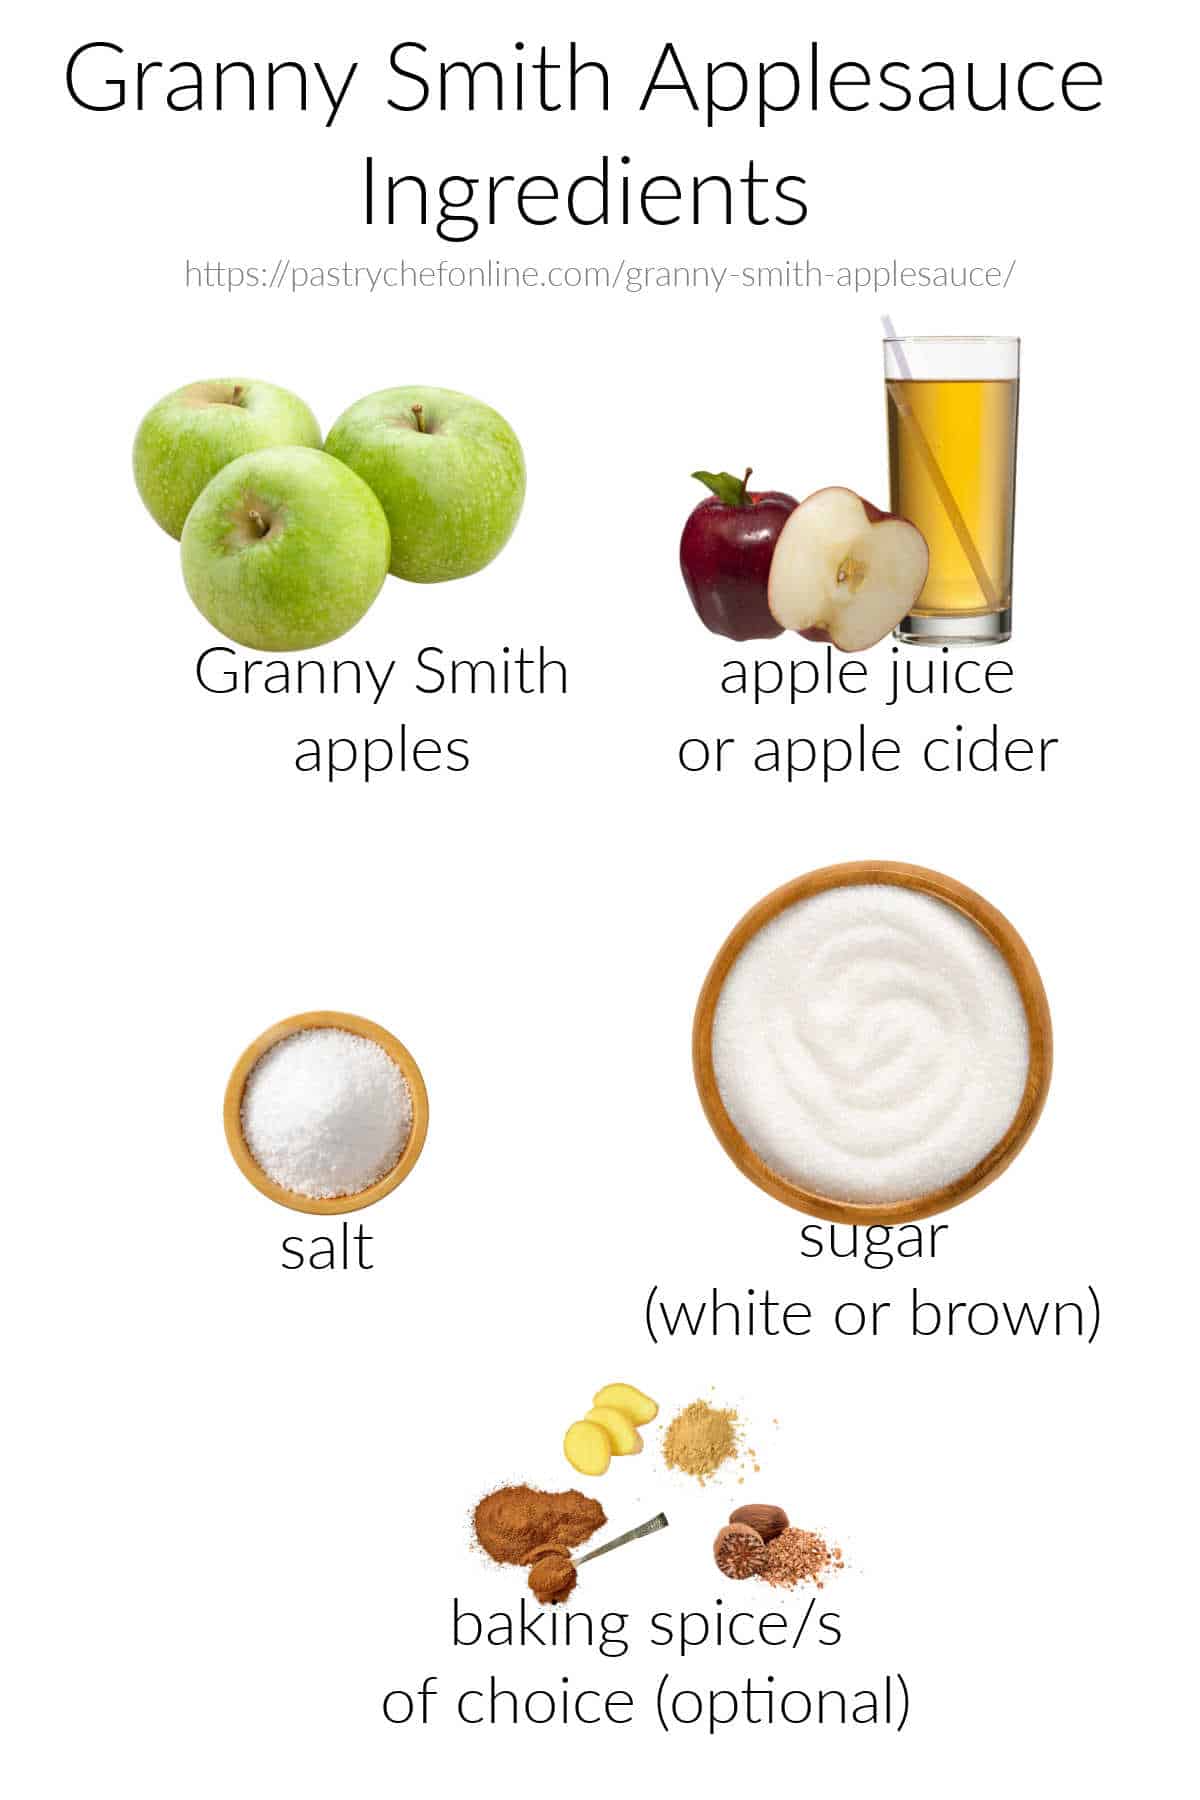 Labeled images of the ingredients needed to make Granny Smith applesauce: Granny Smith apples, apple juice or apple cider, salt, sugar (whote or brown), and baking spice/s of choice (optional).